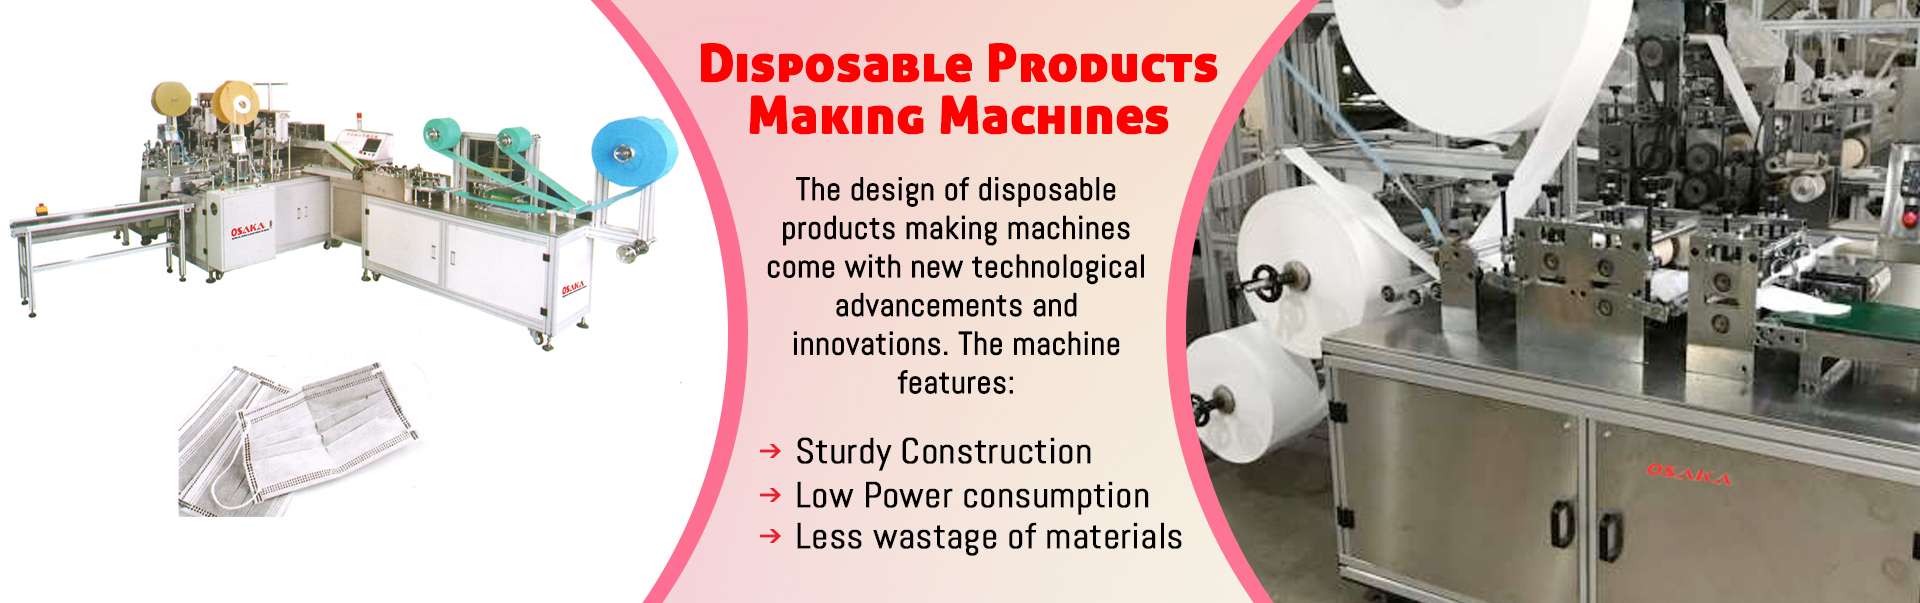 Disposable Products Making Machines in Haryana